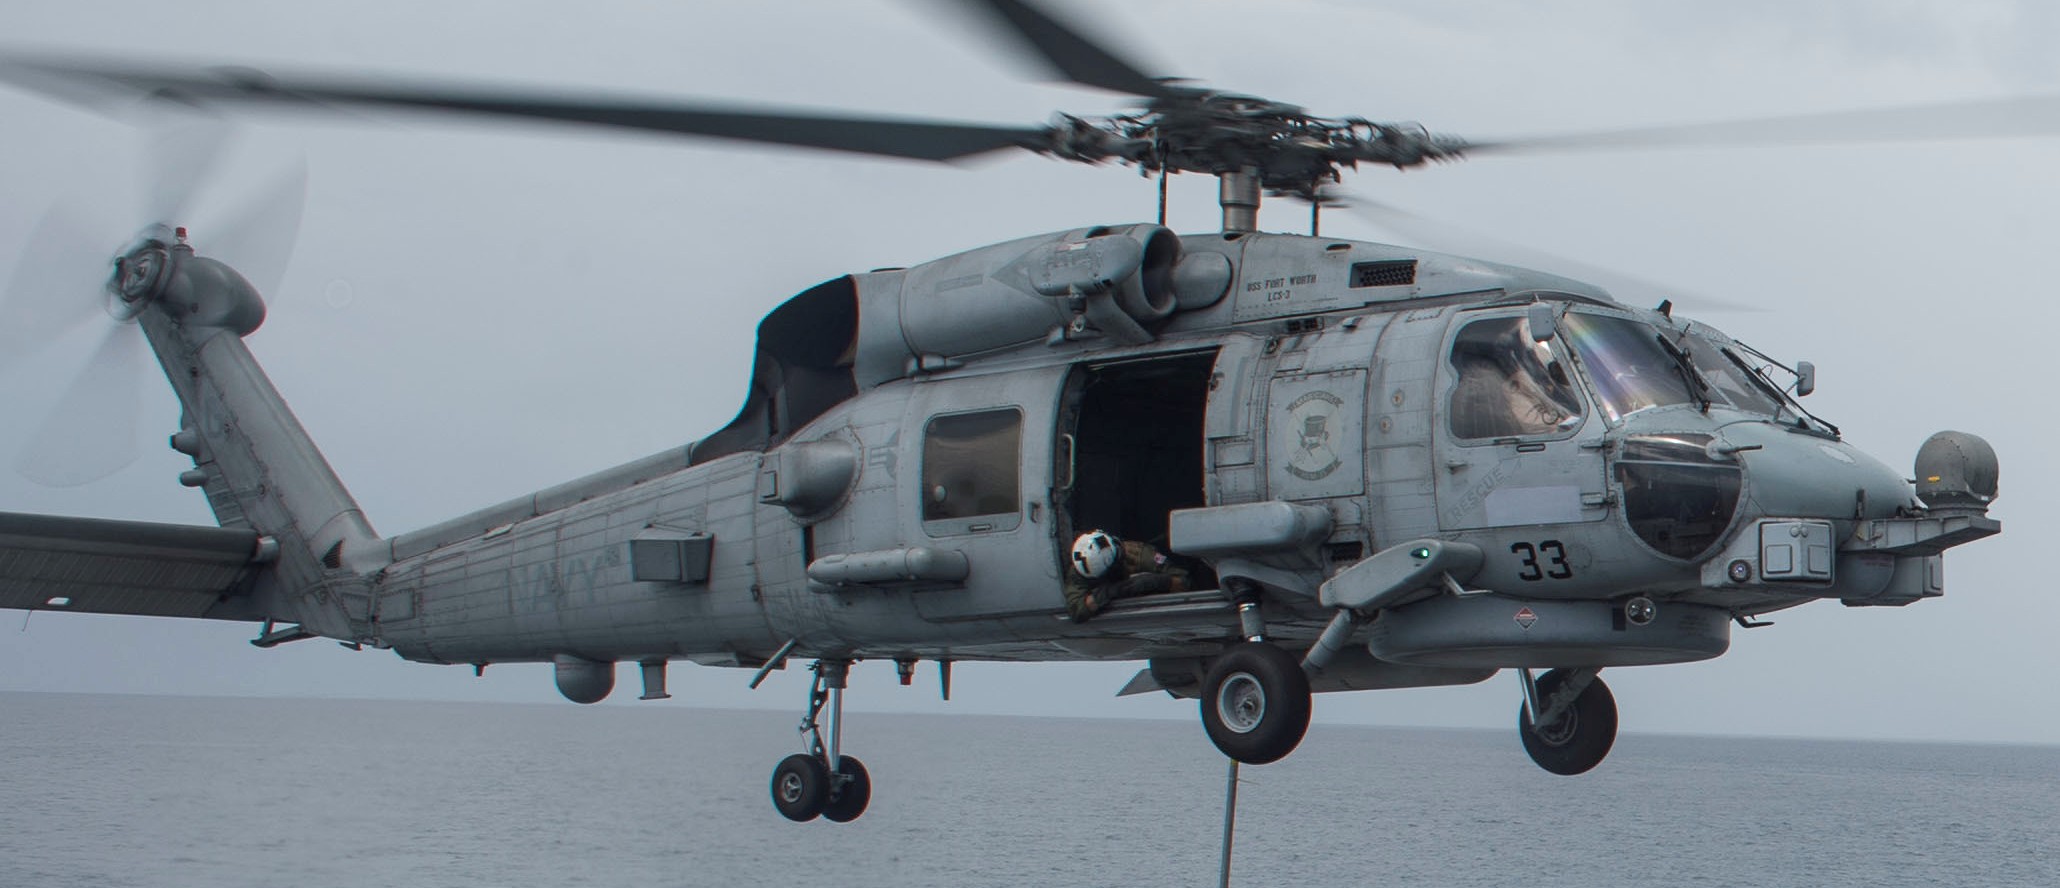 hsm-35 magicians helicopter maritime strike squadron mh-60r seahawk 13